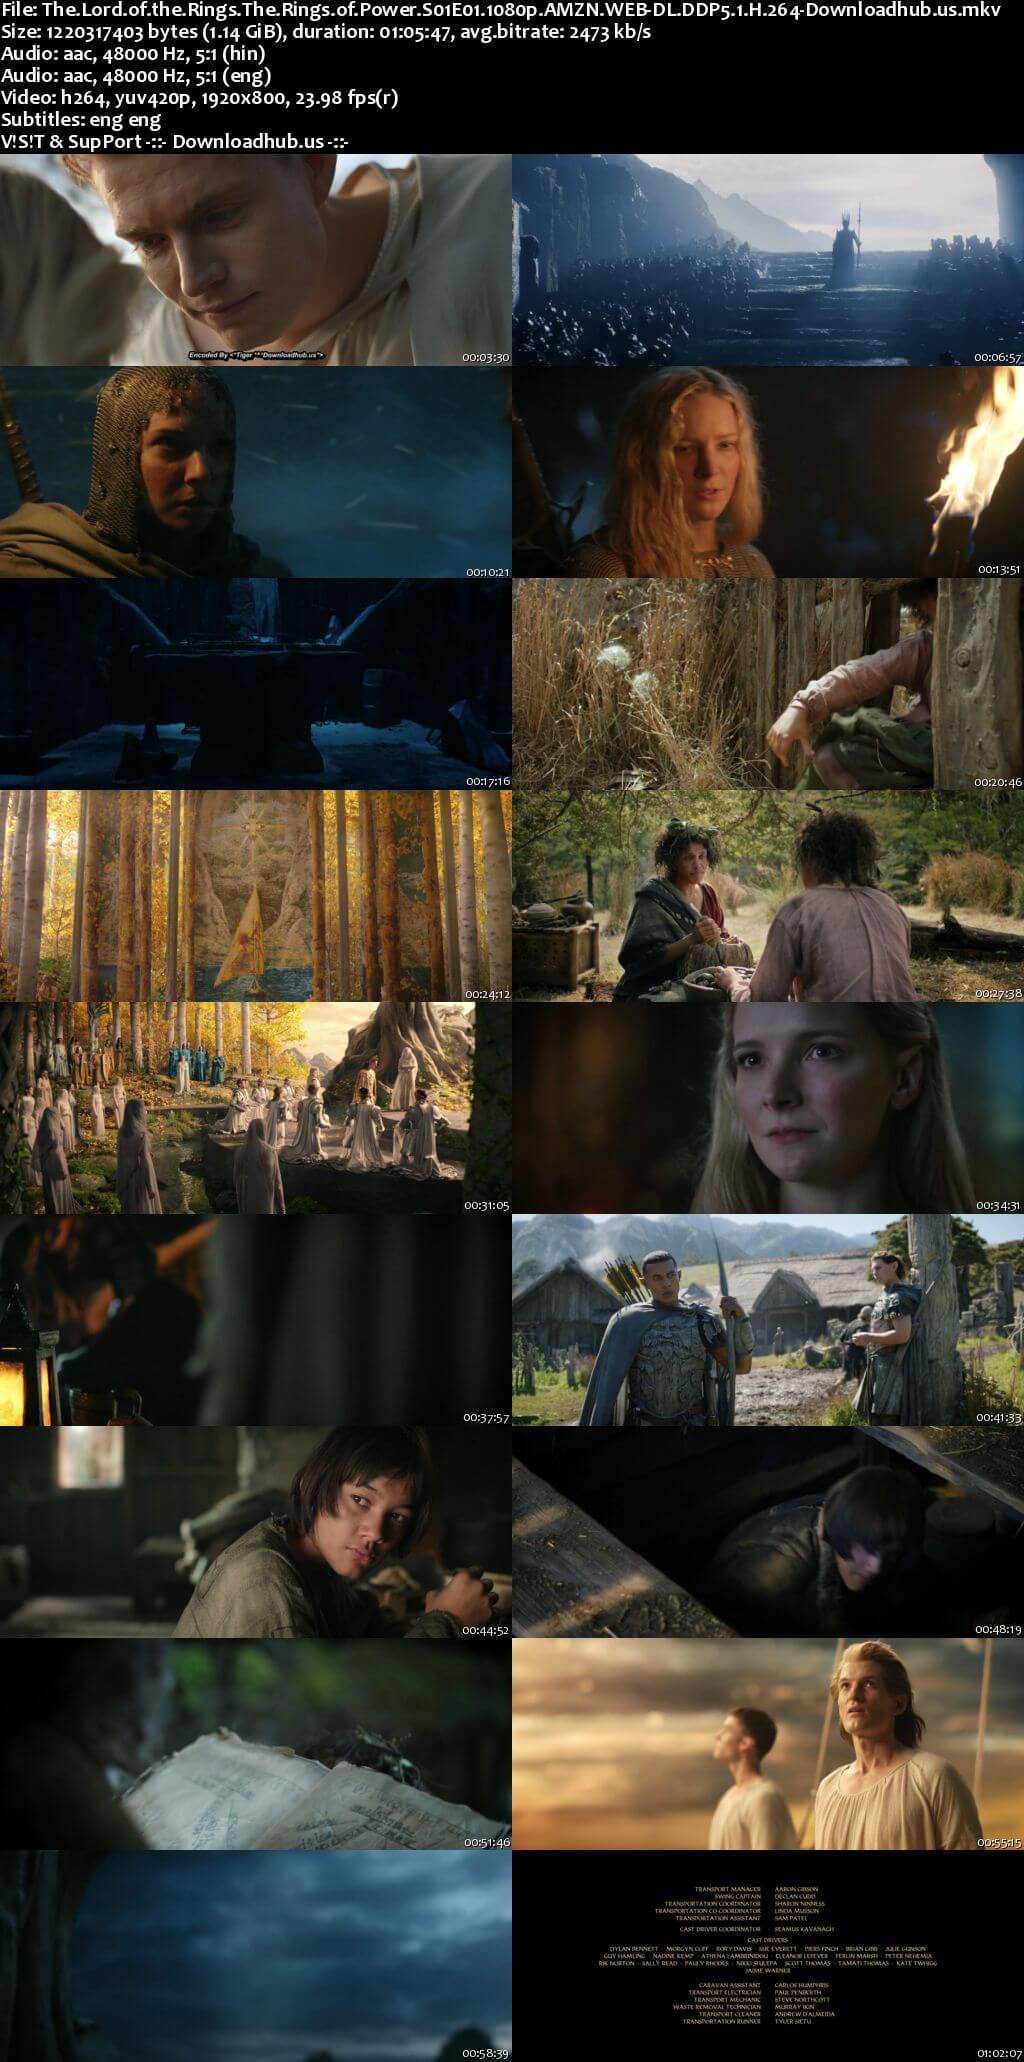 The Lord of the Rings The Rings of Power 2022 S01 Complete Hindi Dual Audio 1080p 720p 480p Web-DL ESubs